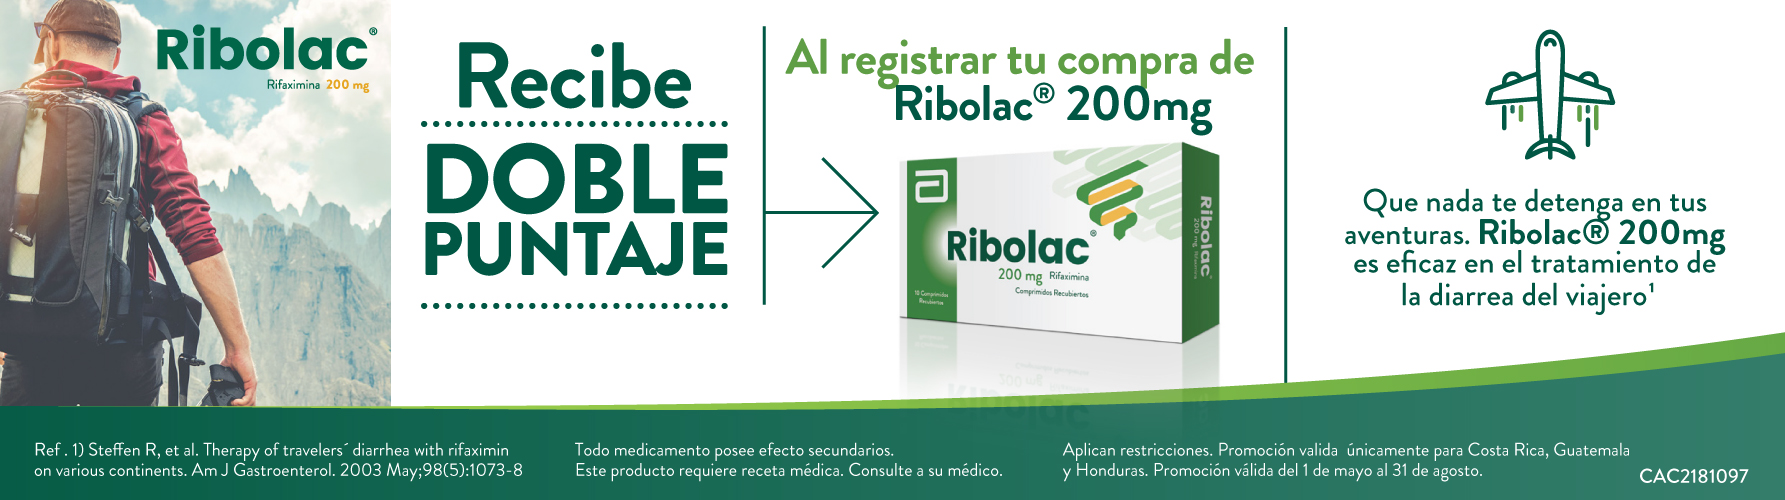 BANNER RIBOLAC-01